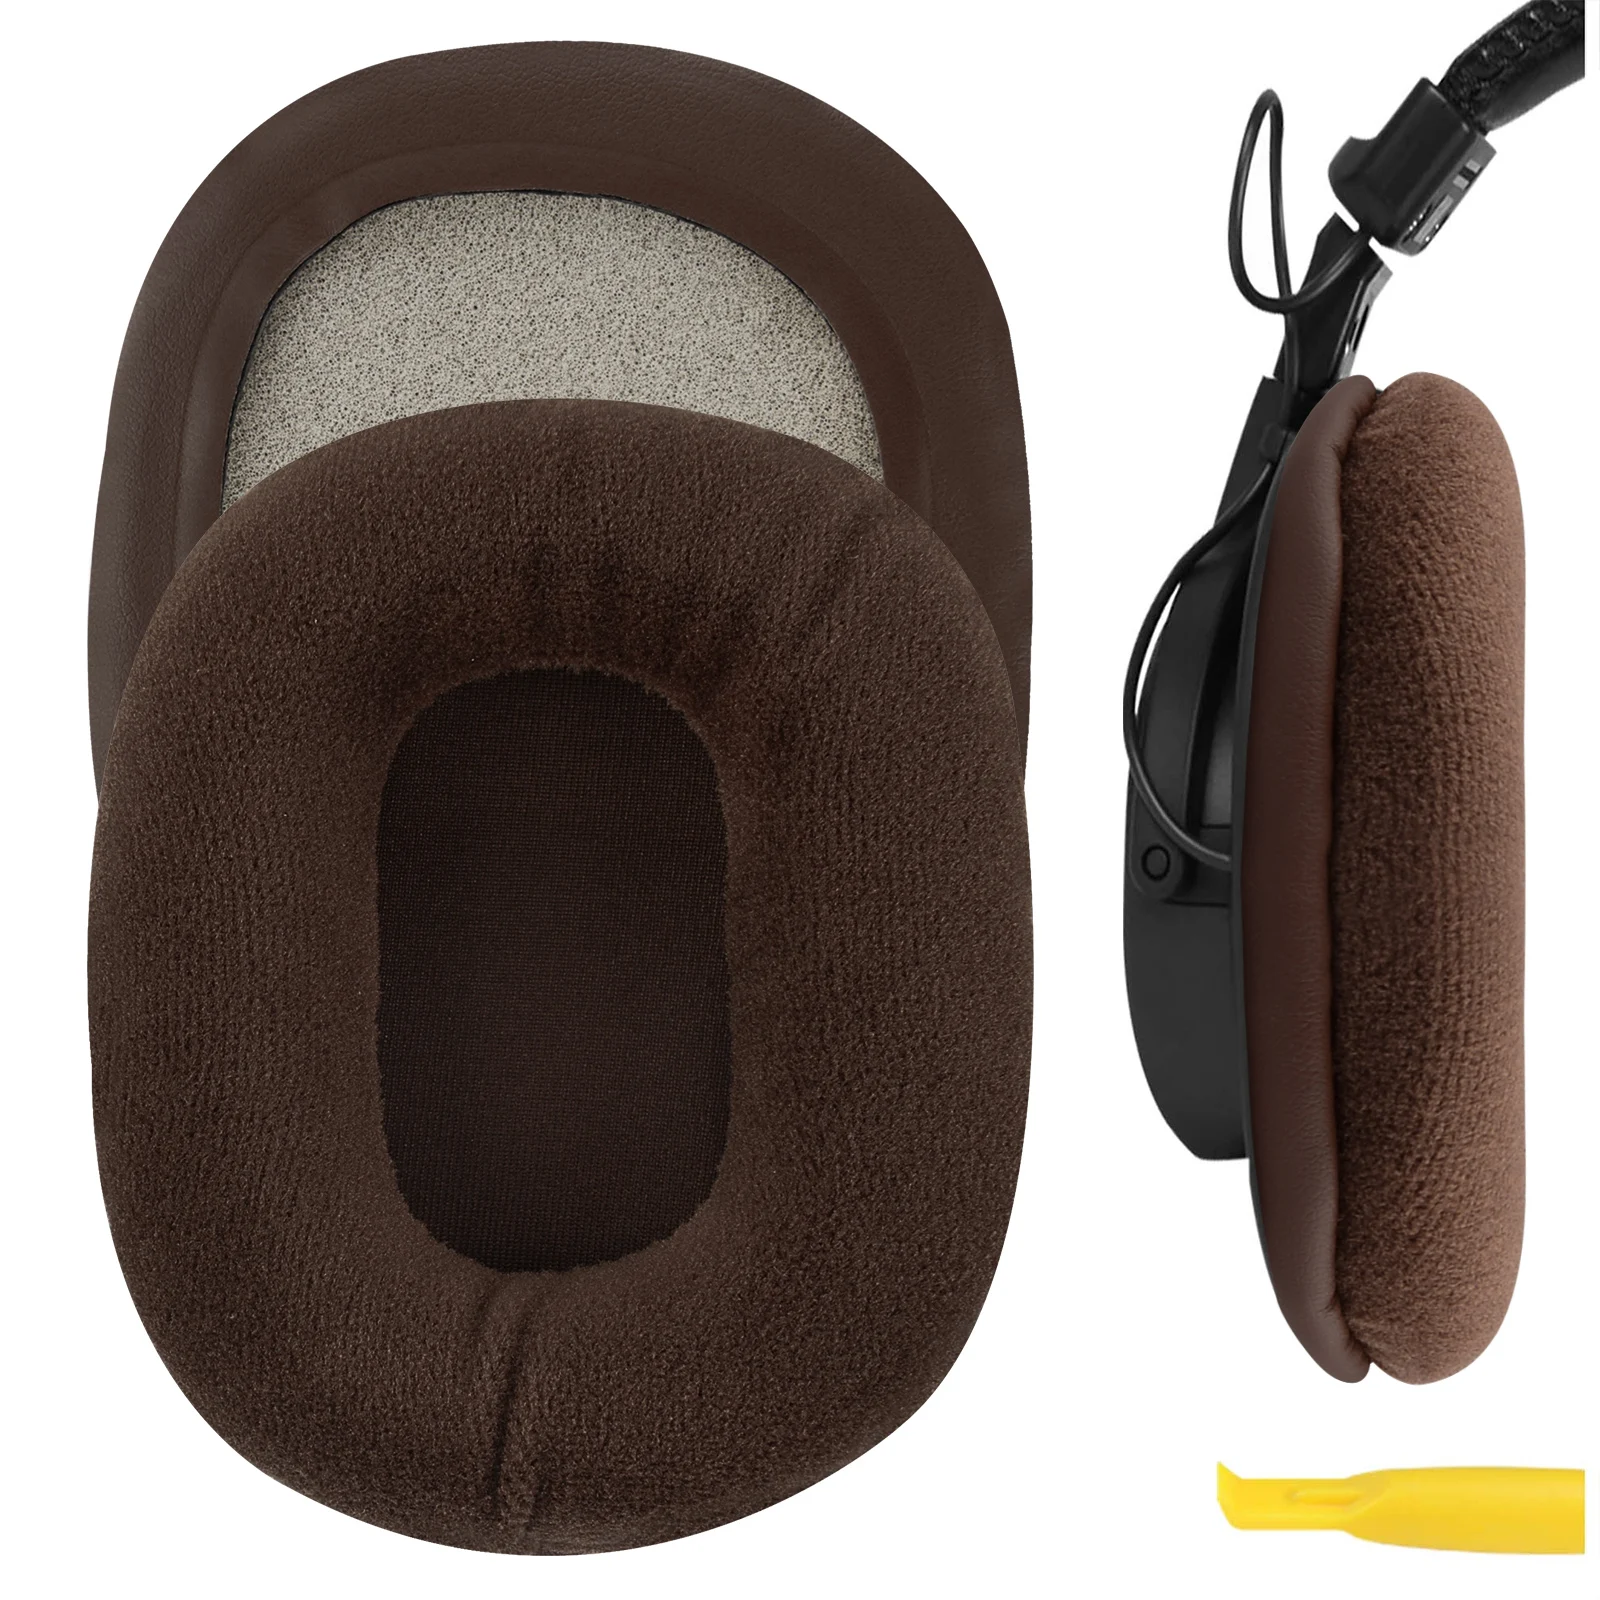 

Geekria Earpads for SONY MDR-7506 MDR-V6 MDR-V7 Replacement Headphones Comfort Velour Ear Pads Cover Cushions Foam Earmuff